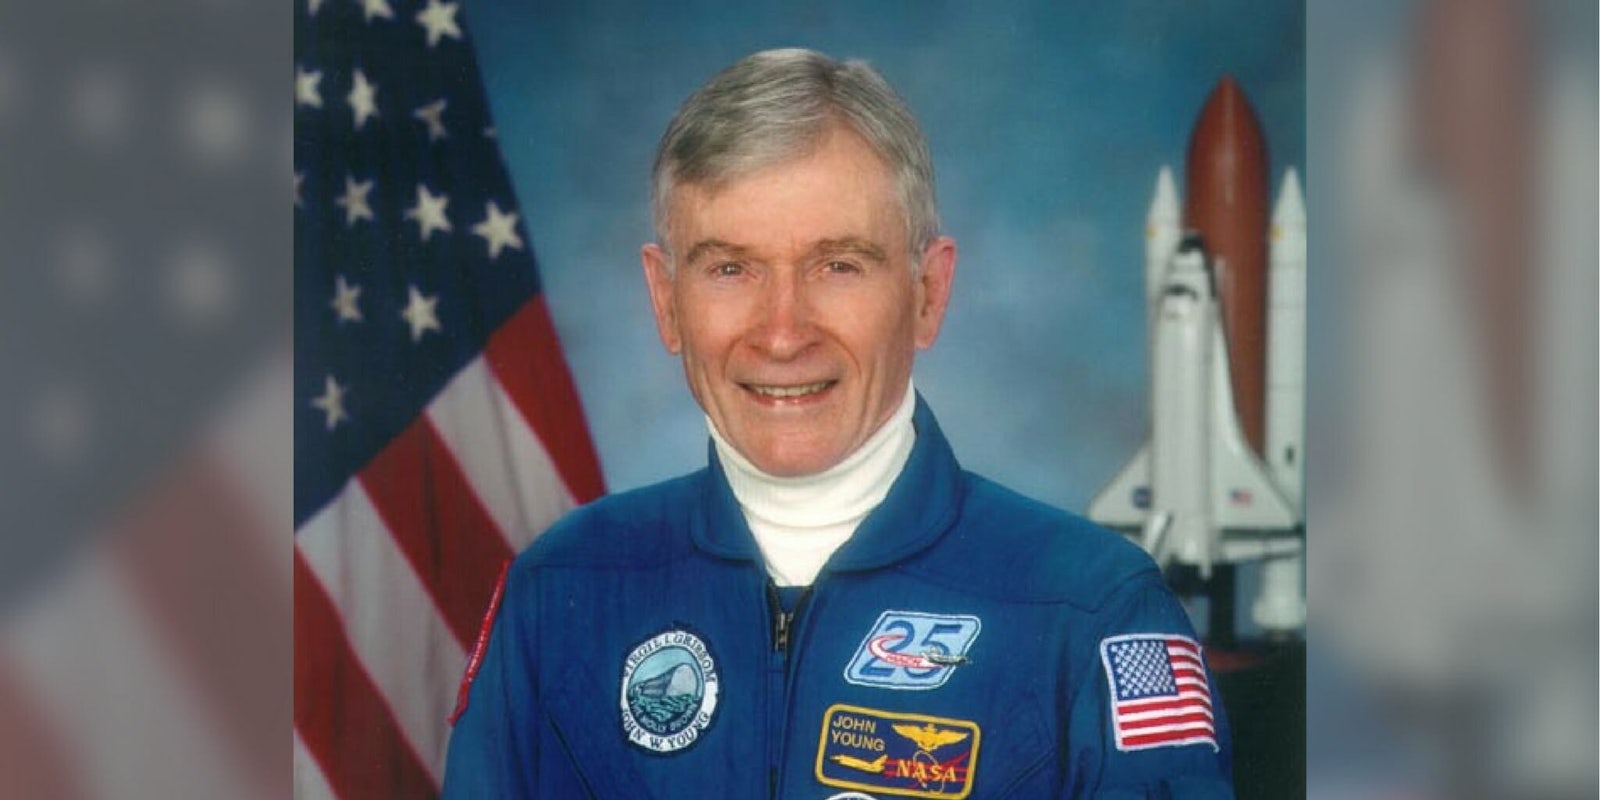 Astronaut John Young who has died at 86.